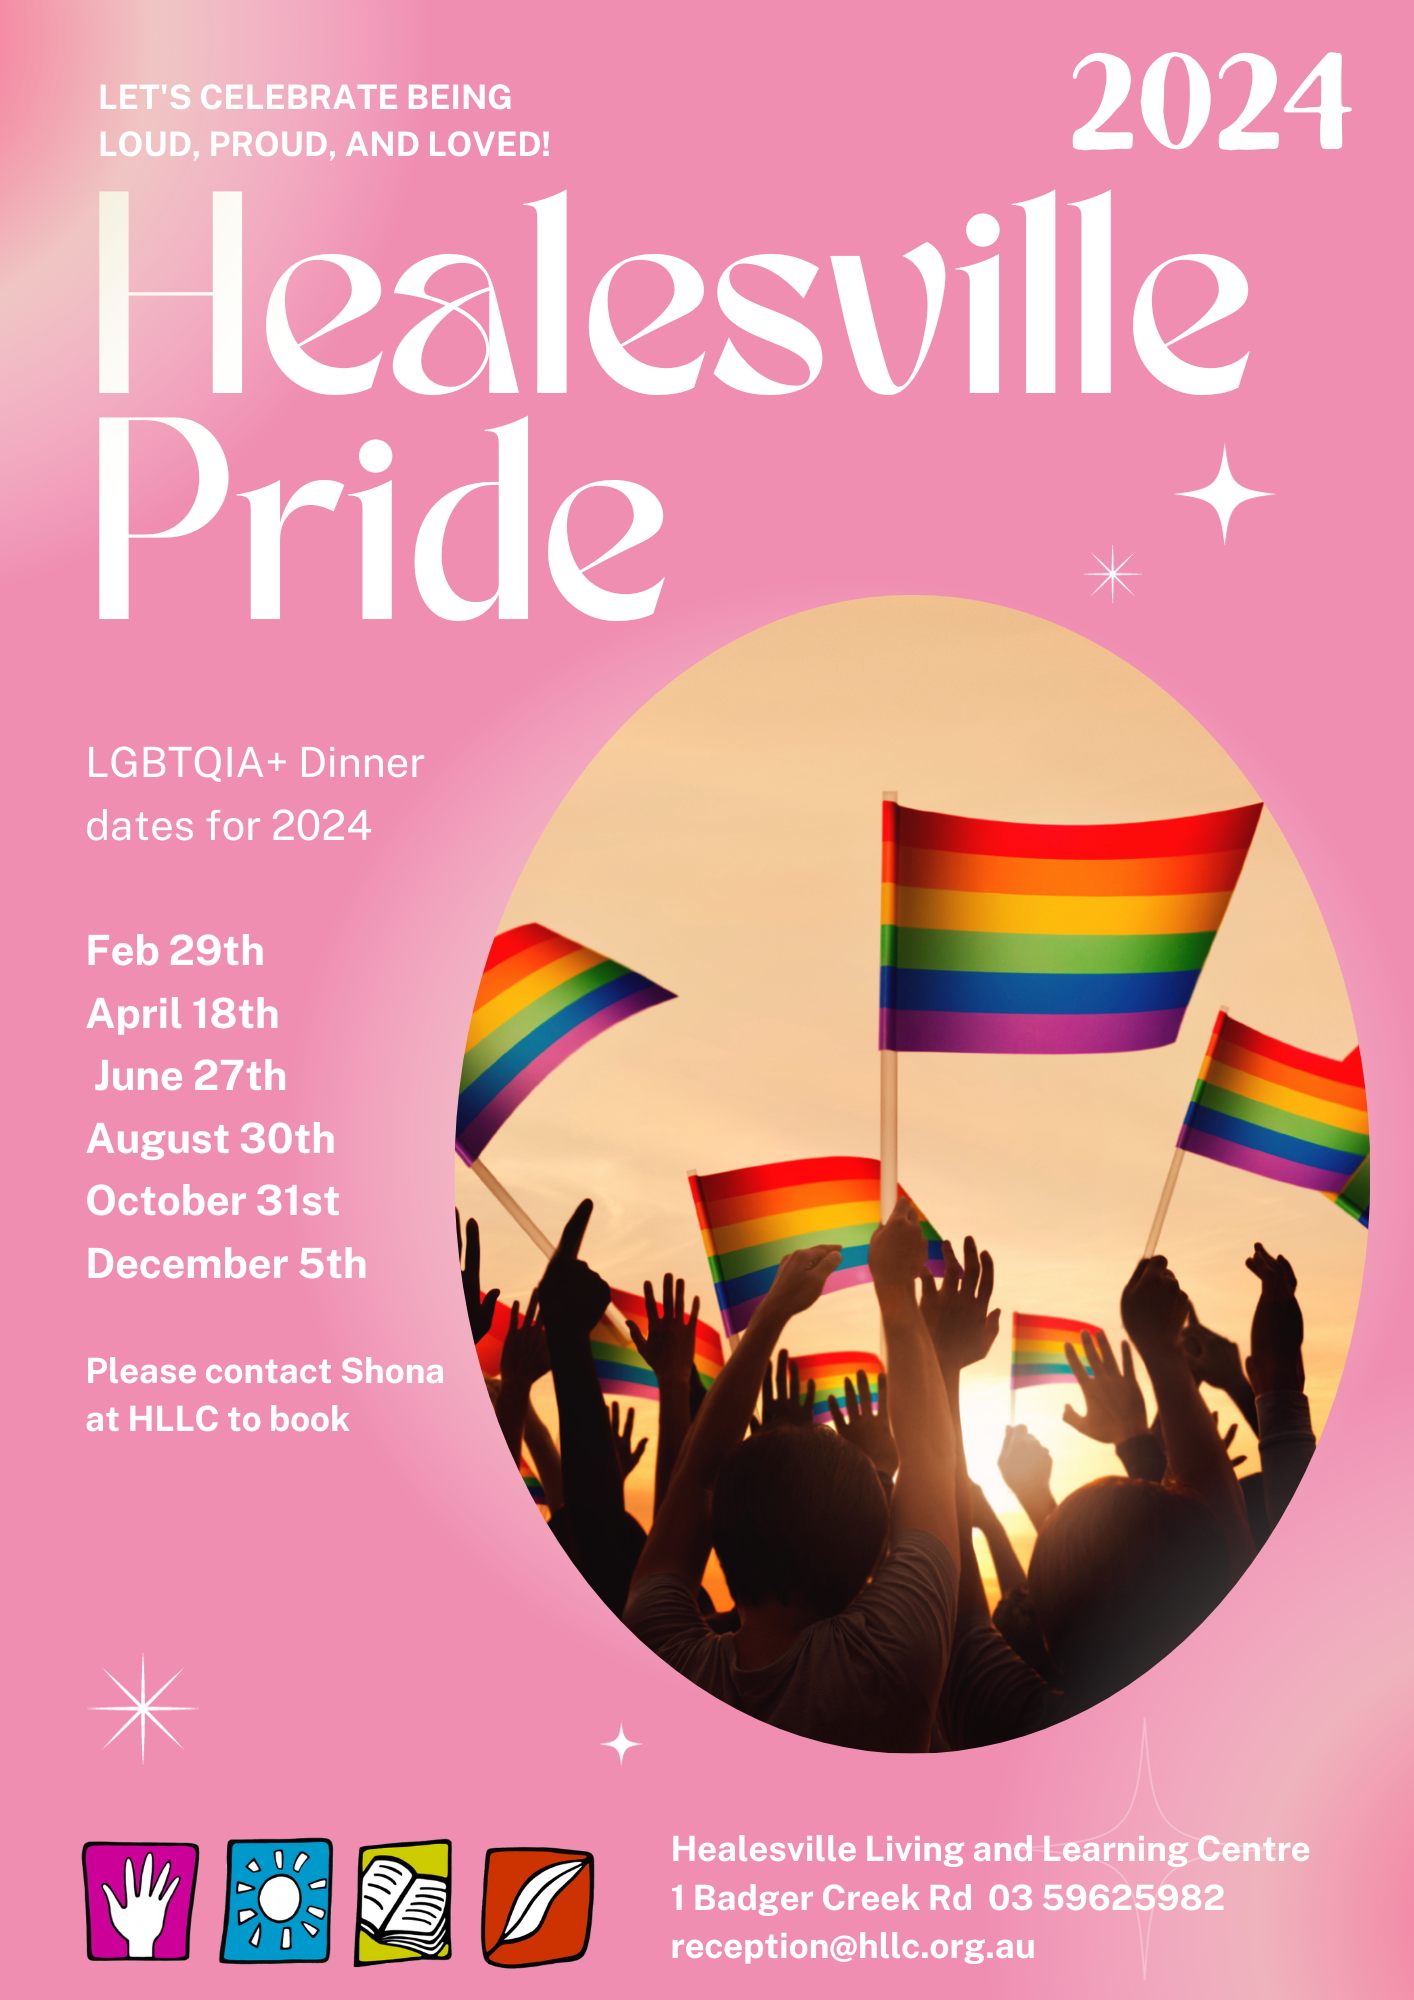 Poster shows a group of people waving pride flags. Details of Dinner dates and contact details are April 18th, June 27th, August 30th, October 31st and December 5th.